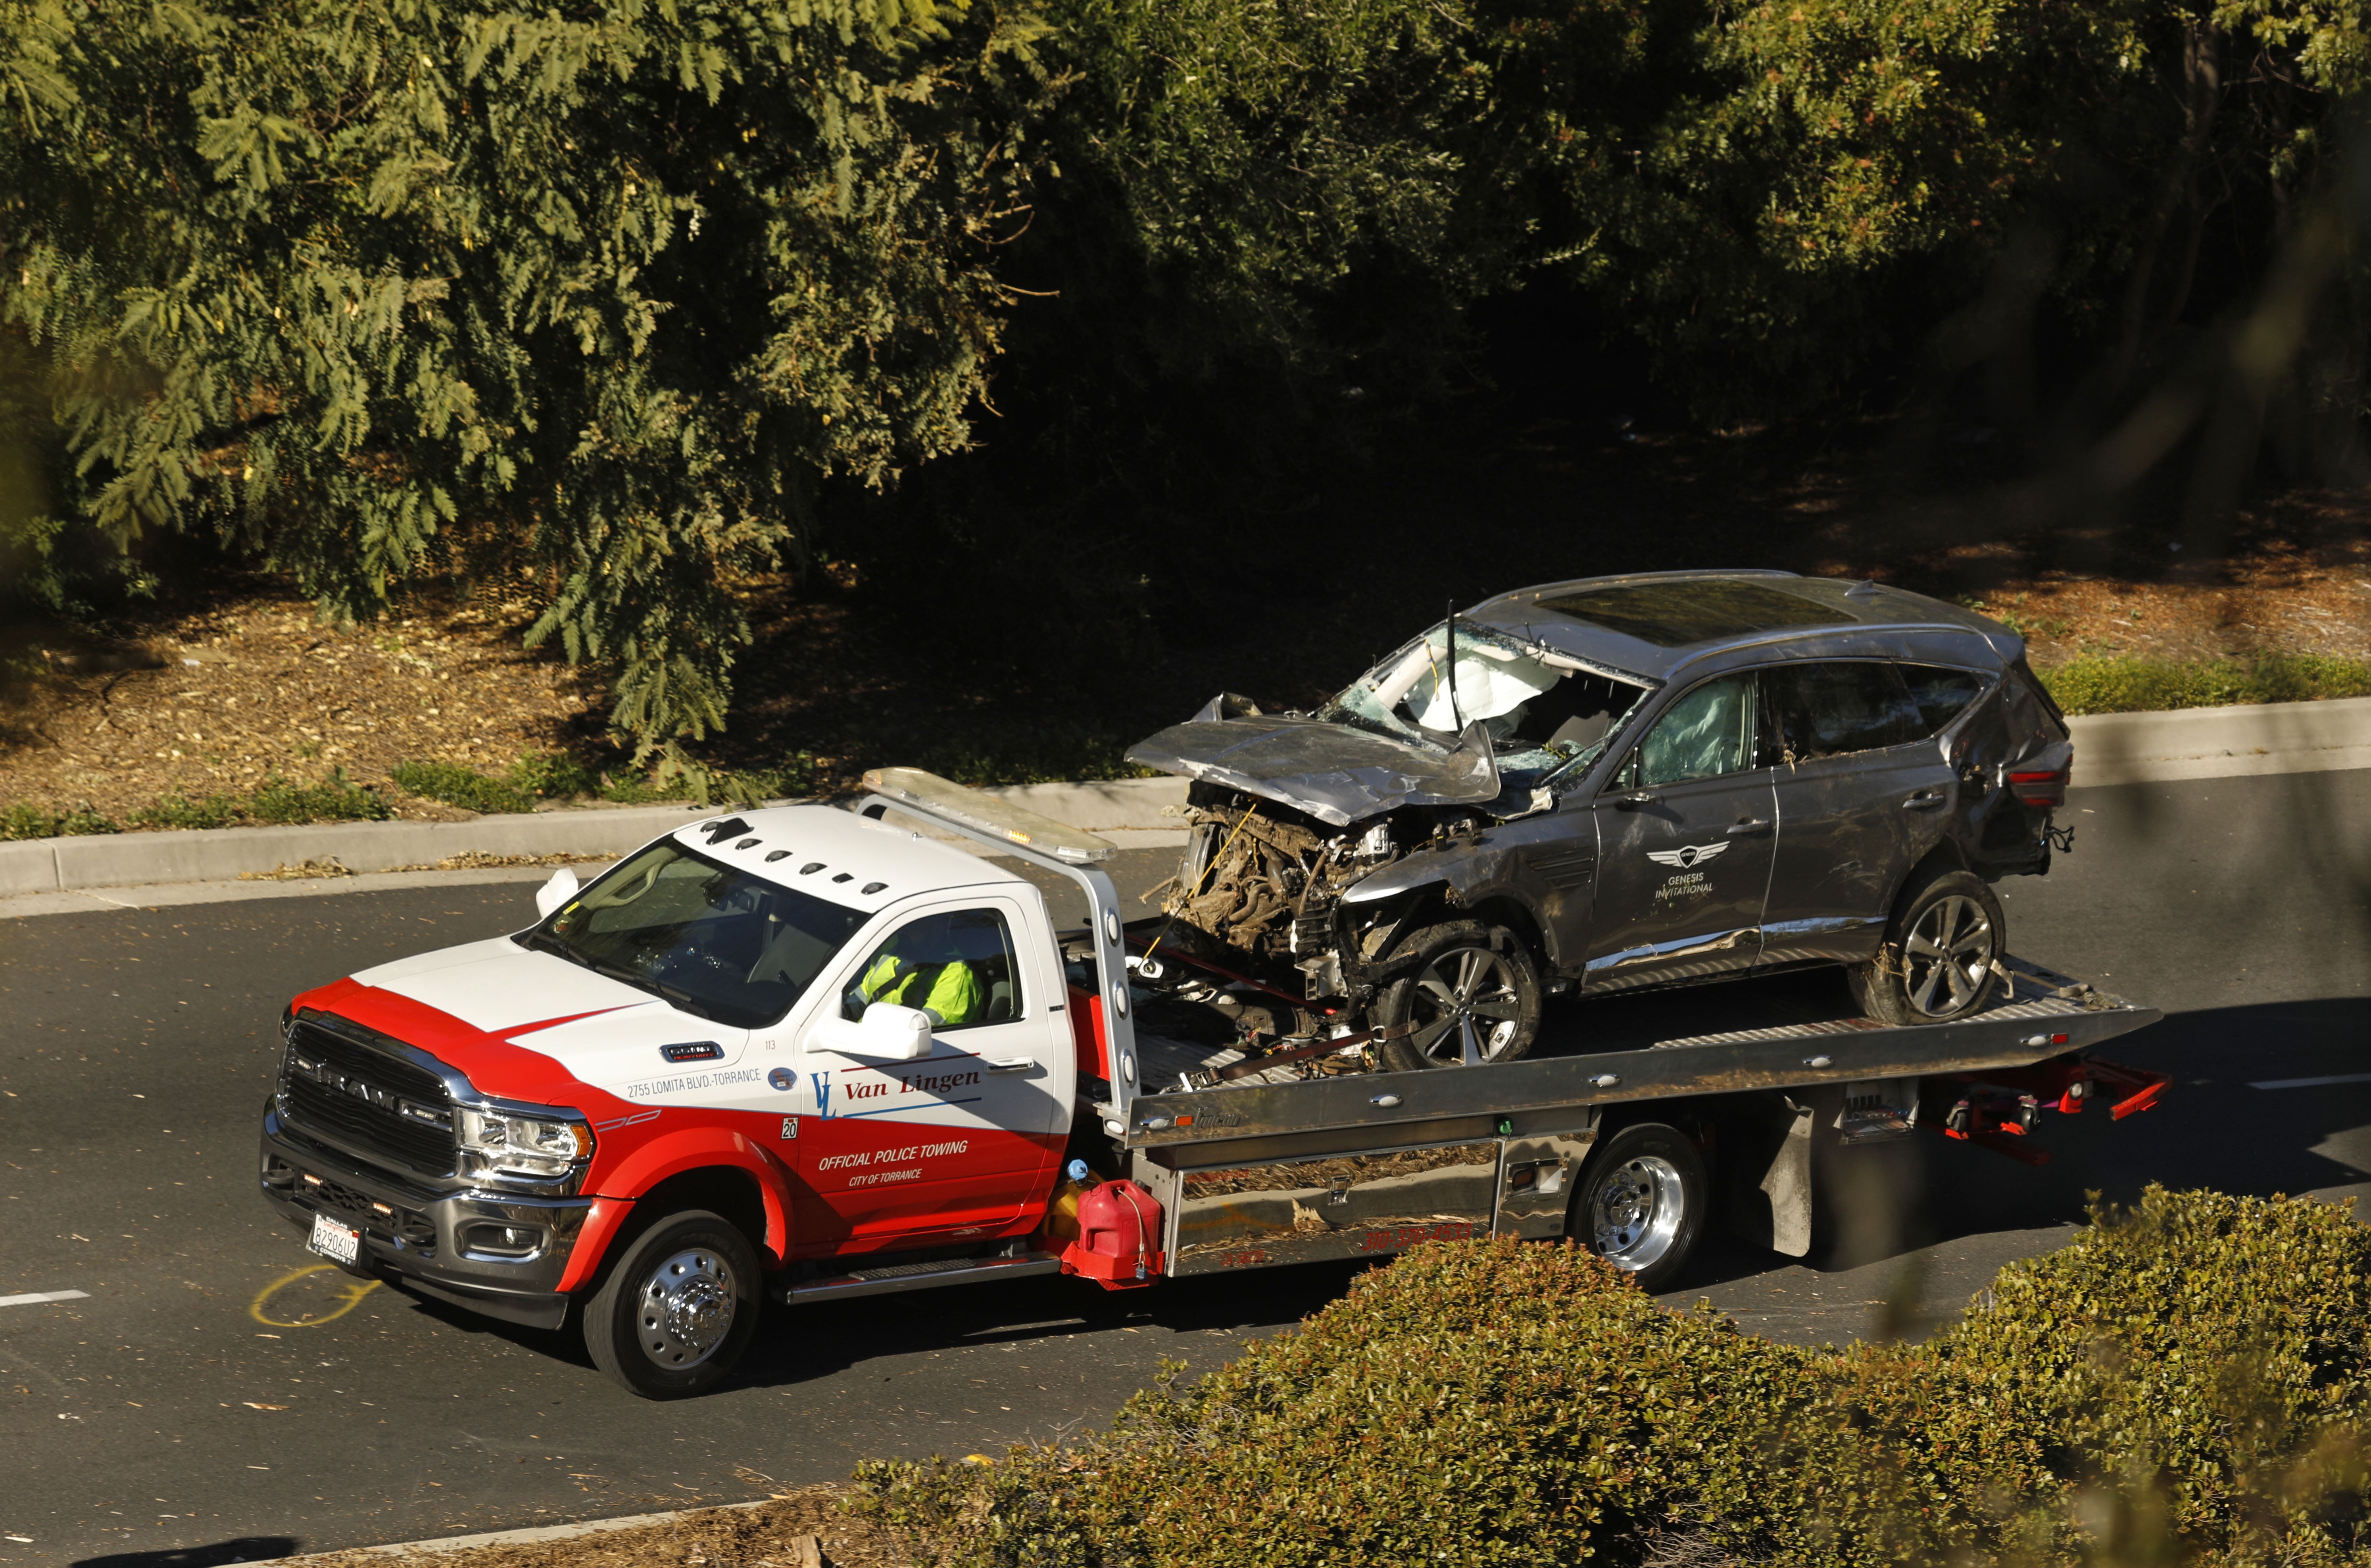 Tiger Woods' car being carried by a truck.